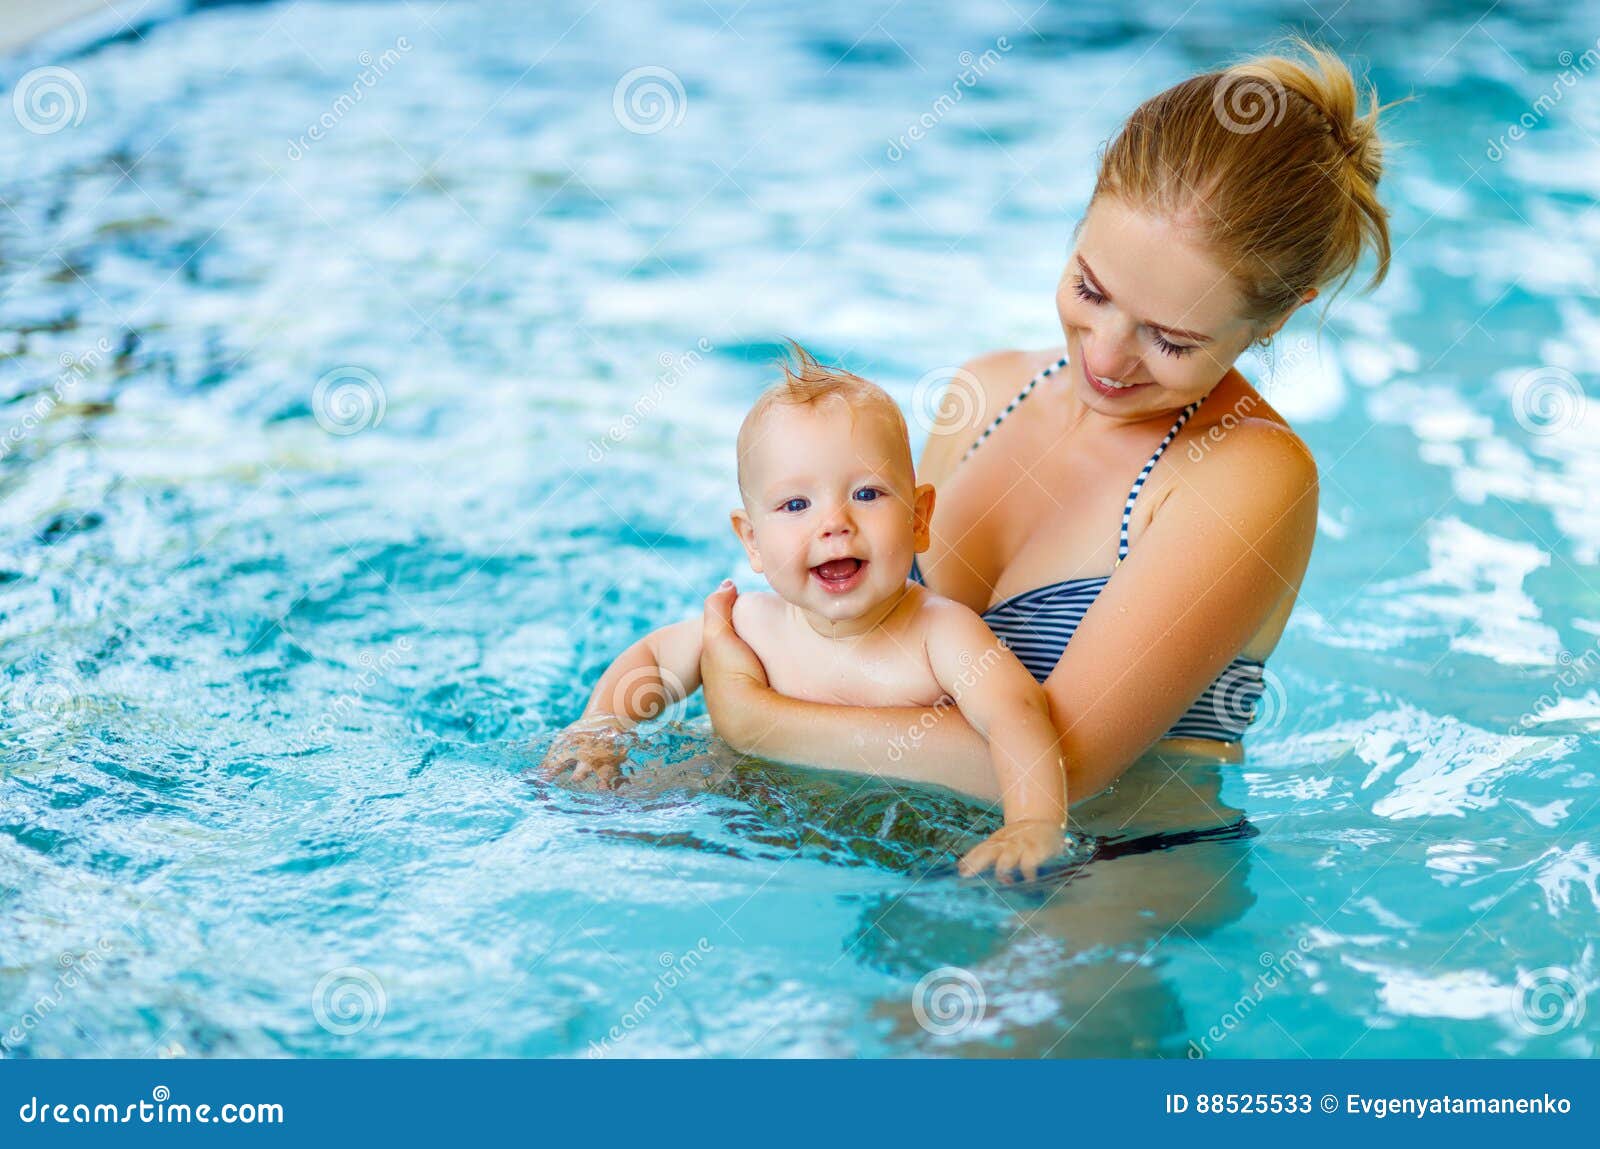 mother and baby swim in pool